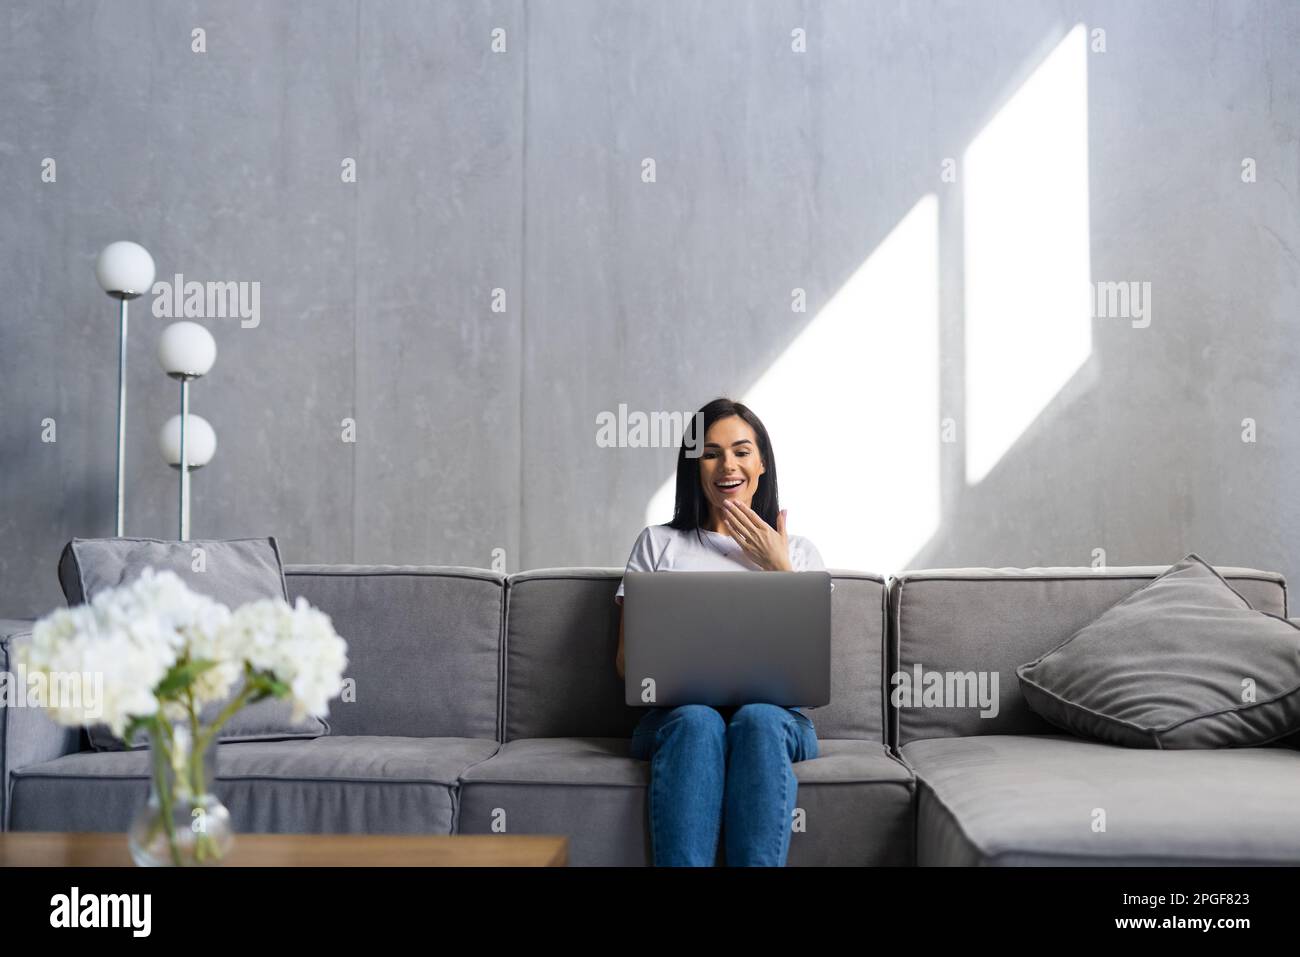 Woman using a laptop while relaxing on the couch Stock Photo